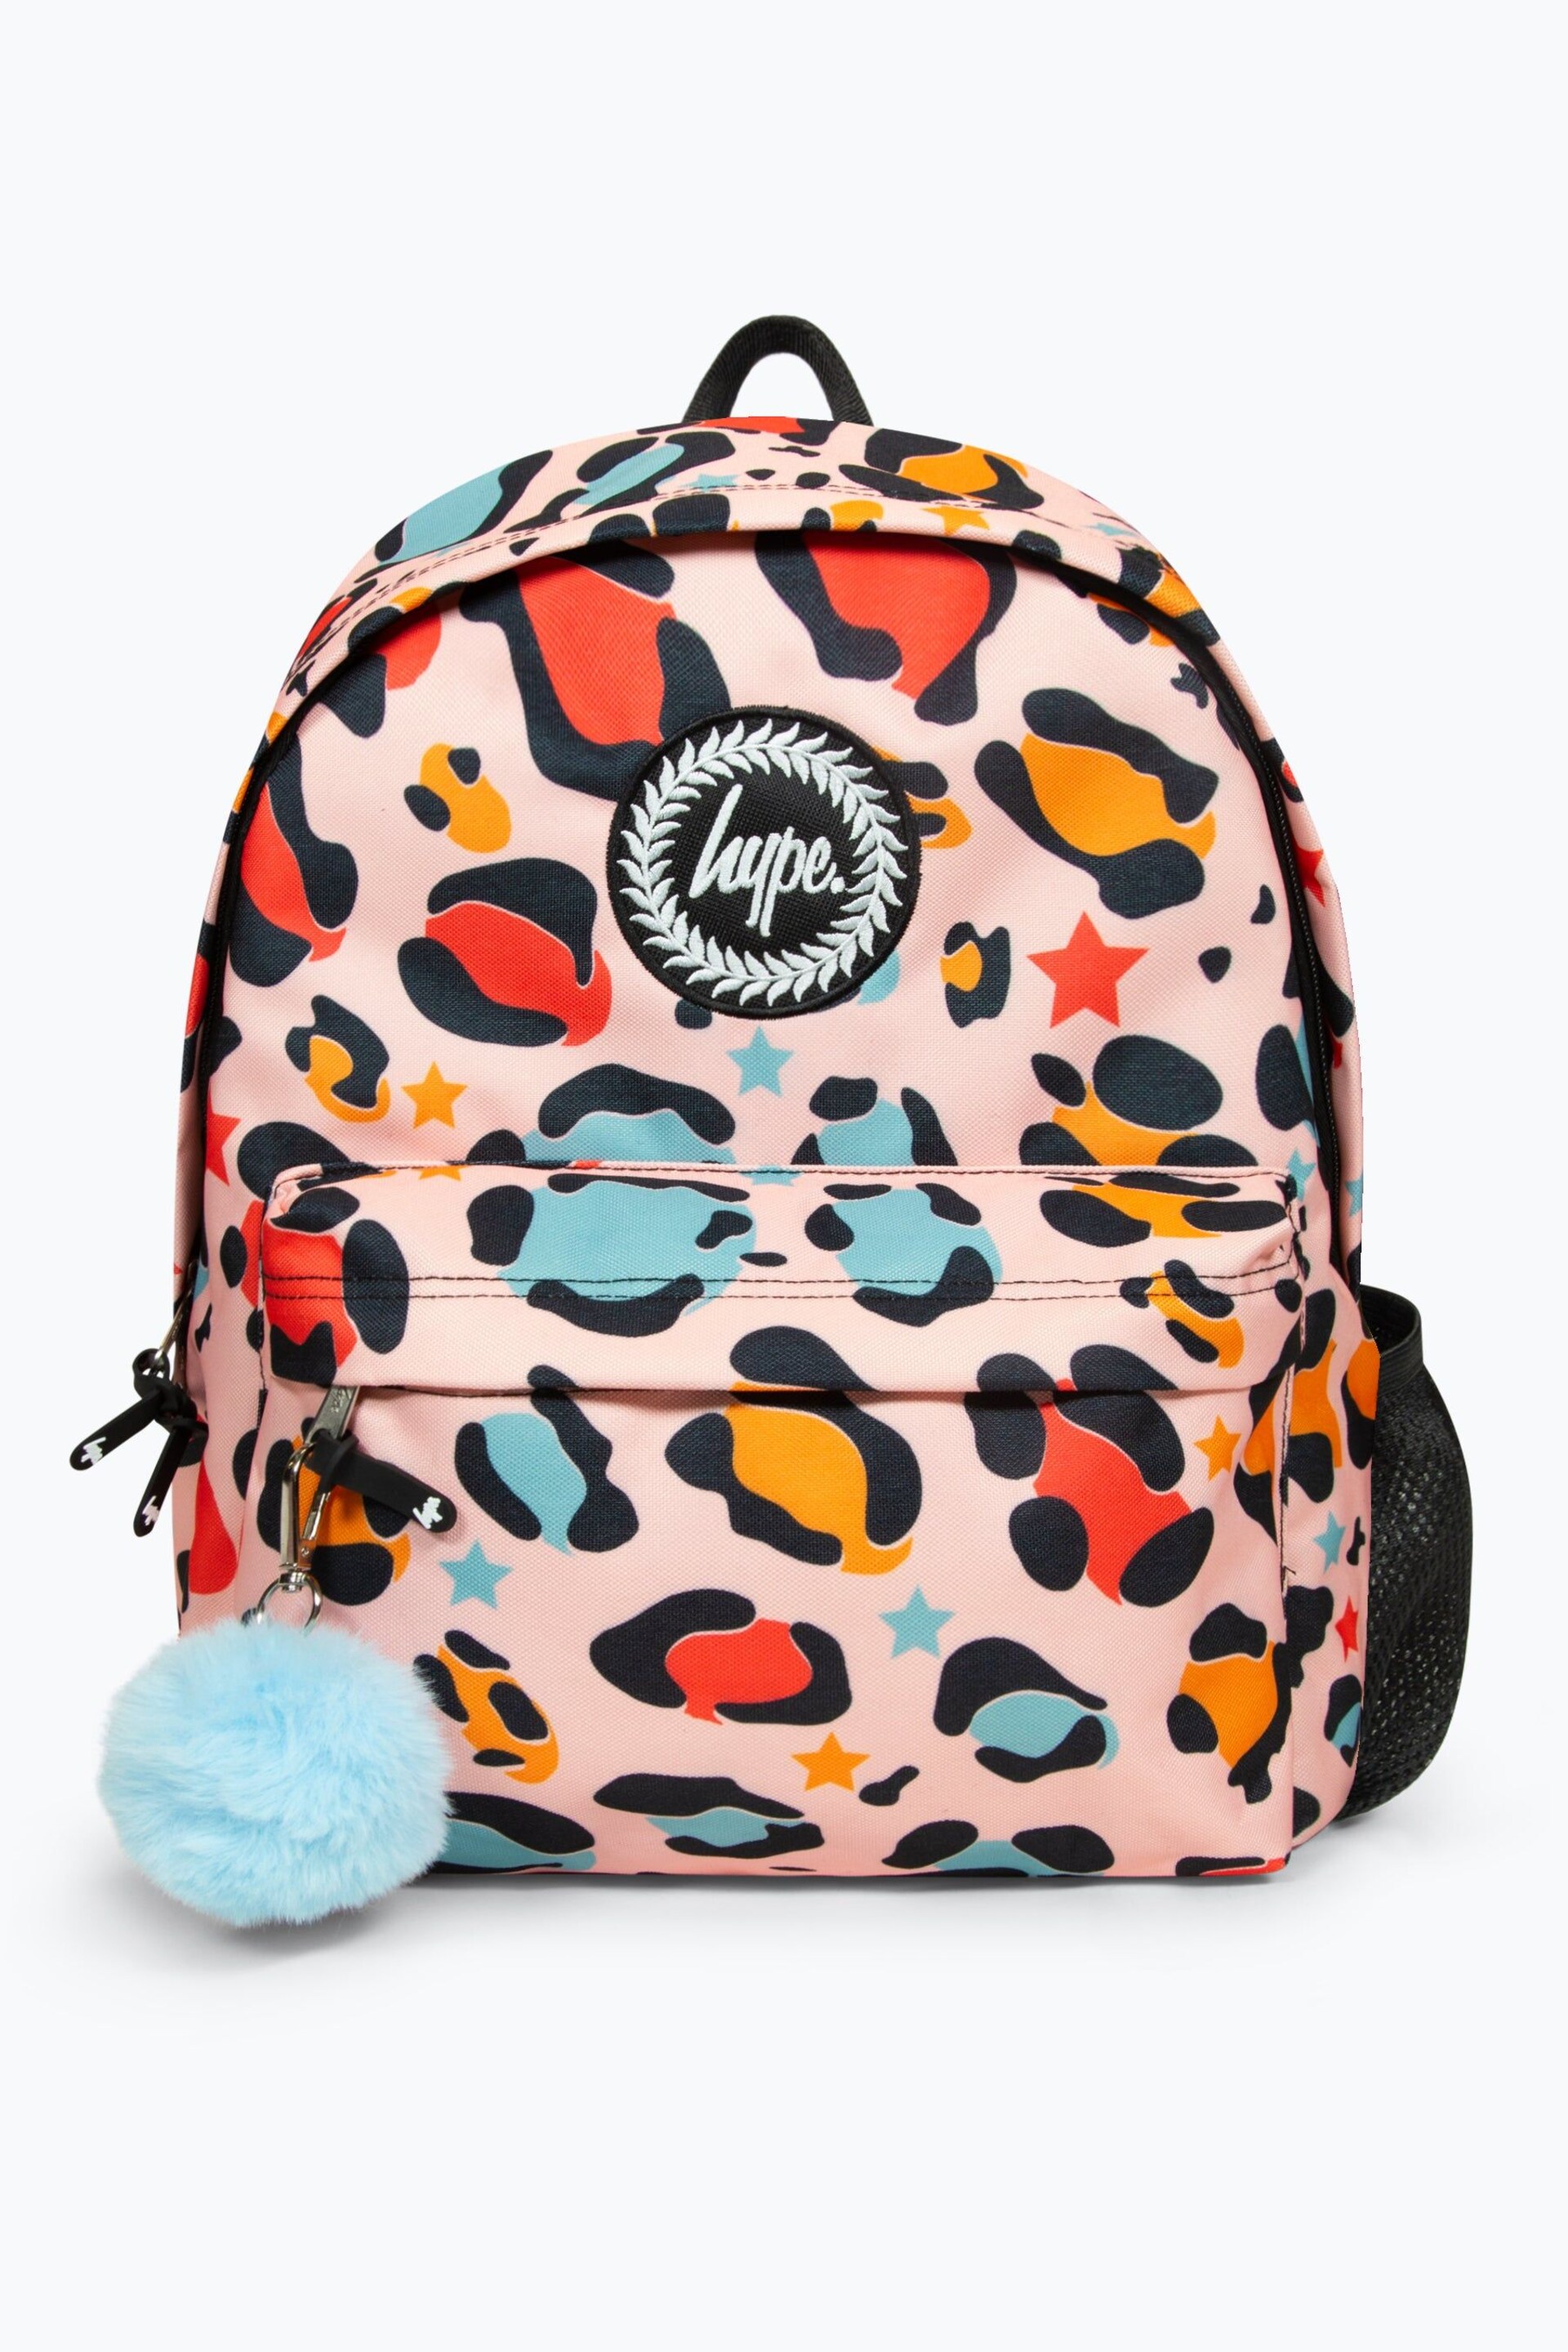 Hype. Peach Star Leopard Badge Backpack - Image 2 of 8